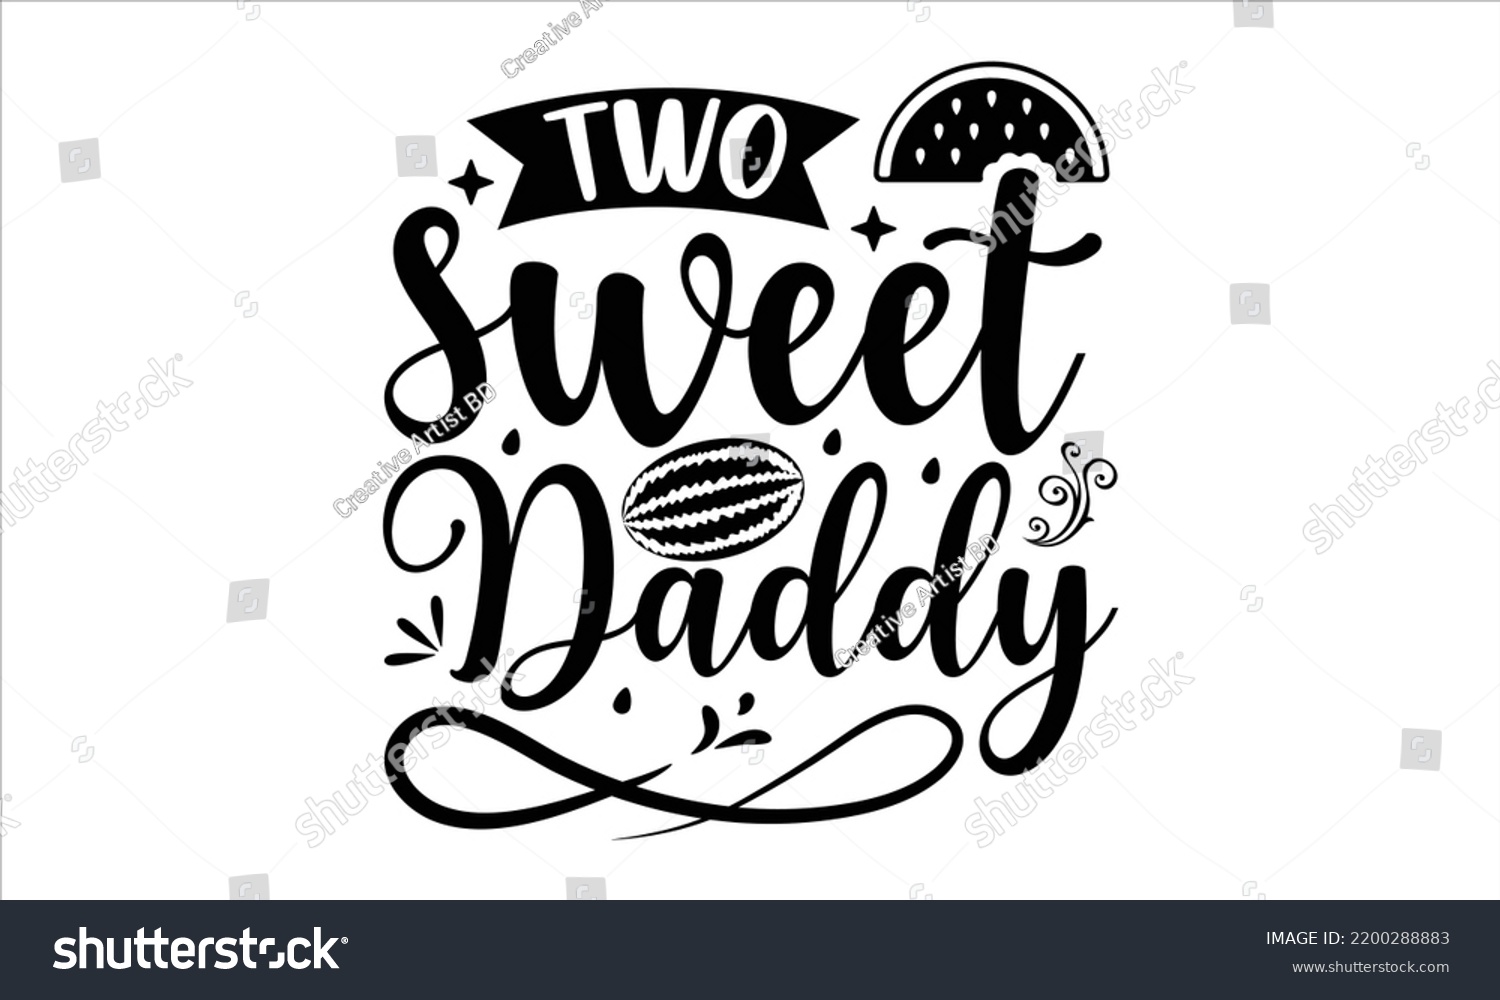 SVG of Two Sweet Daddy - Watermelon T shirt Design, Modern calligraphy, Cut Files for Cricut Svg, Illustration for prints on bags, posters svg